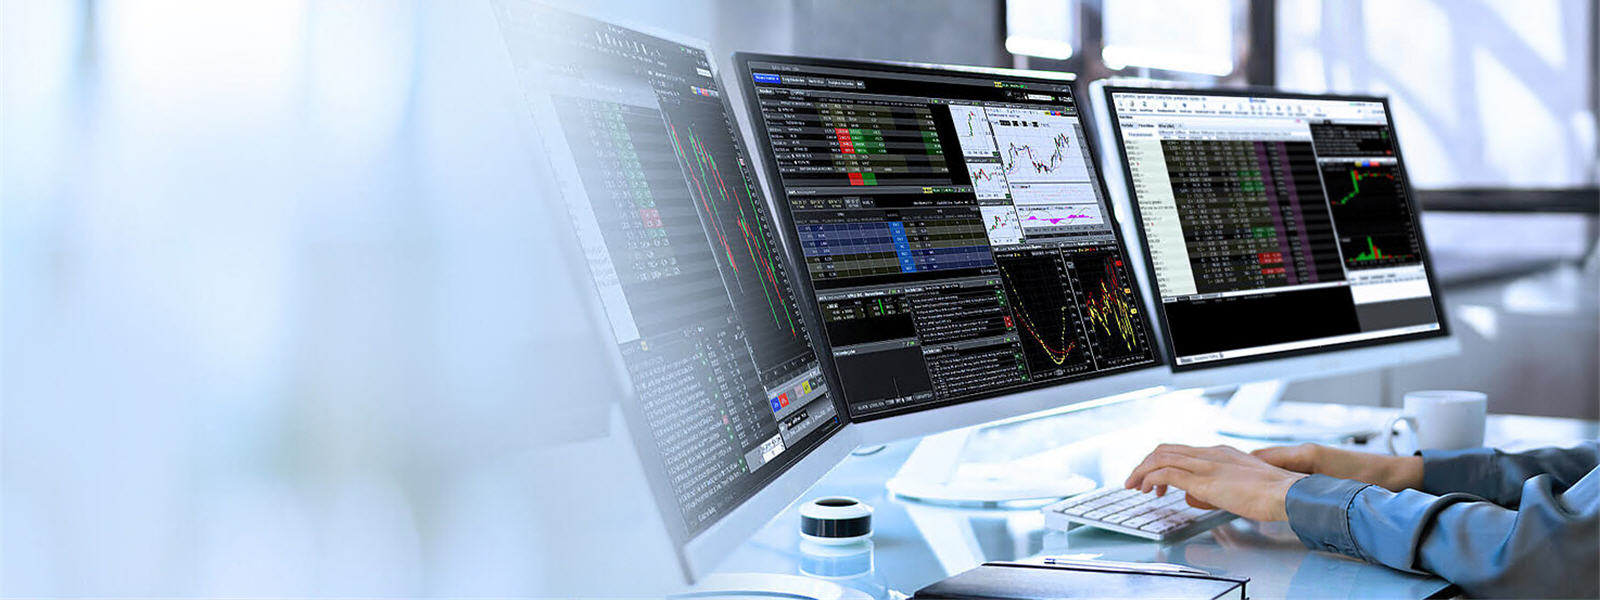 The Trader Workstation platform from Interactive Brokers.